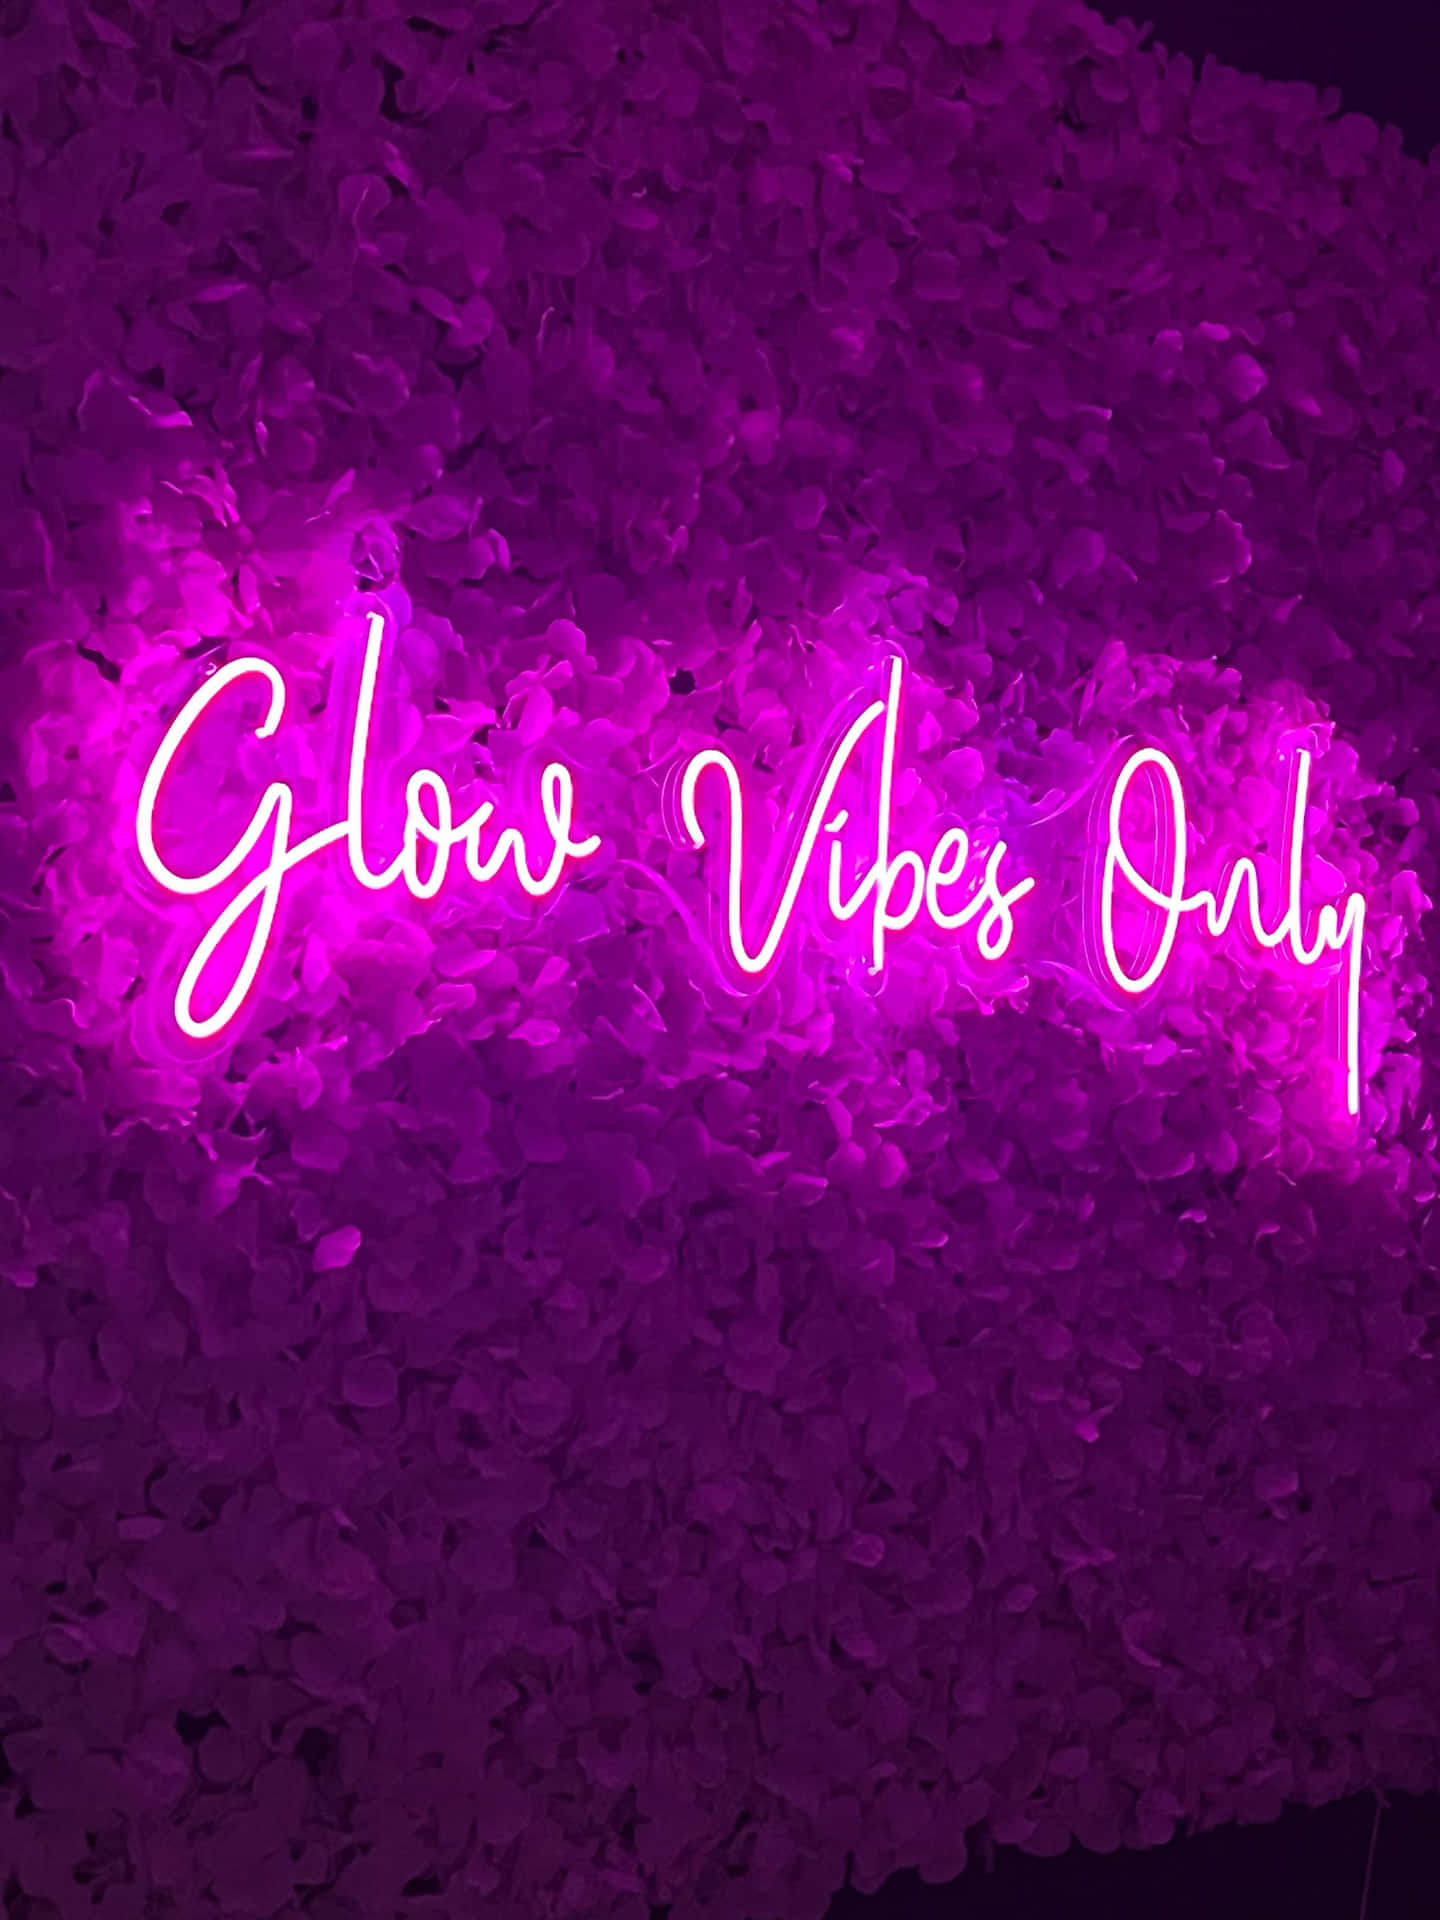 Glow Vibes Only Neon Sign Wallpaper